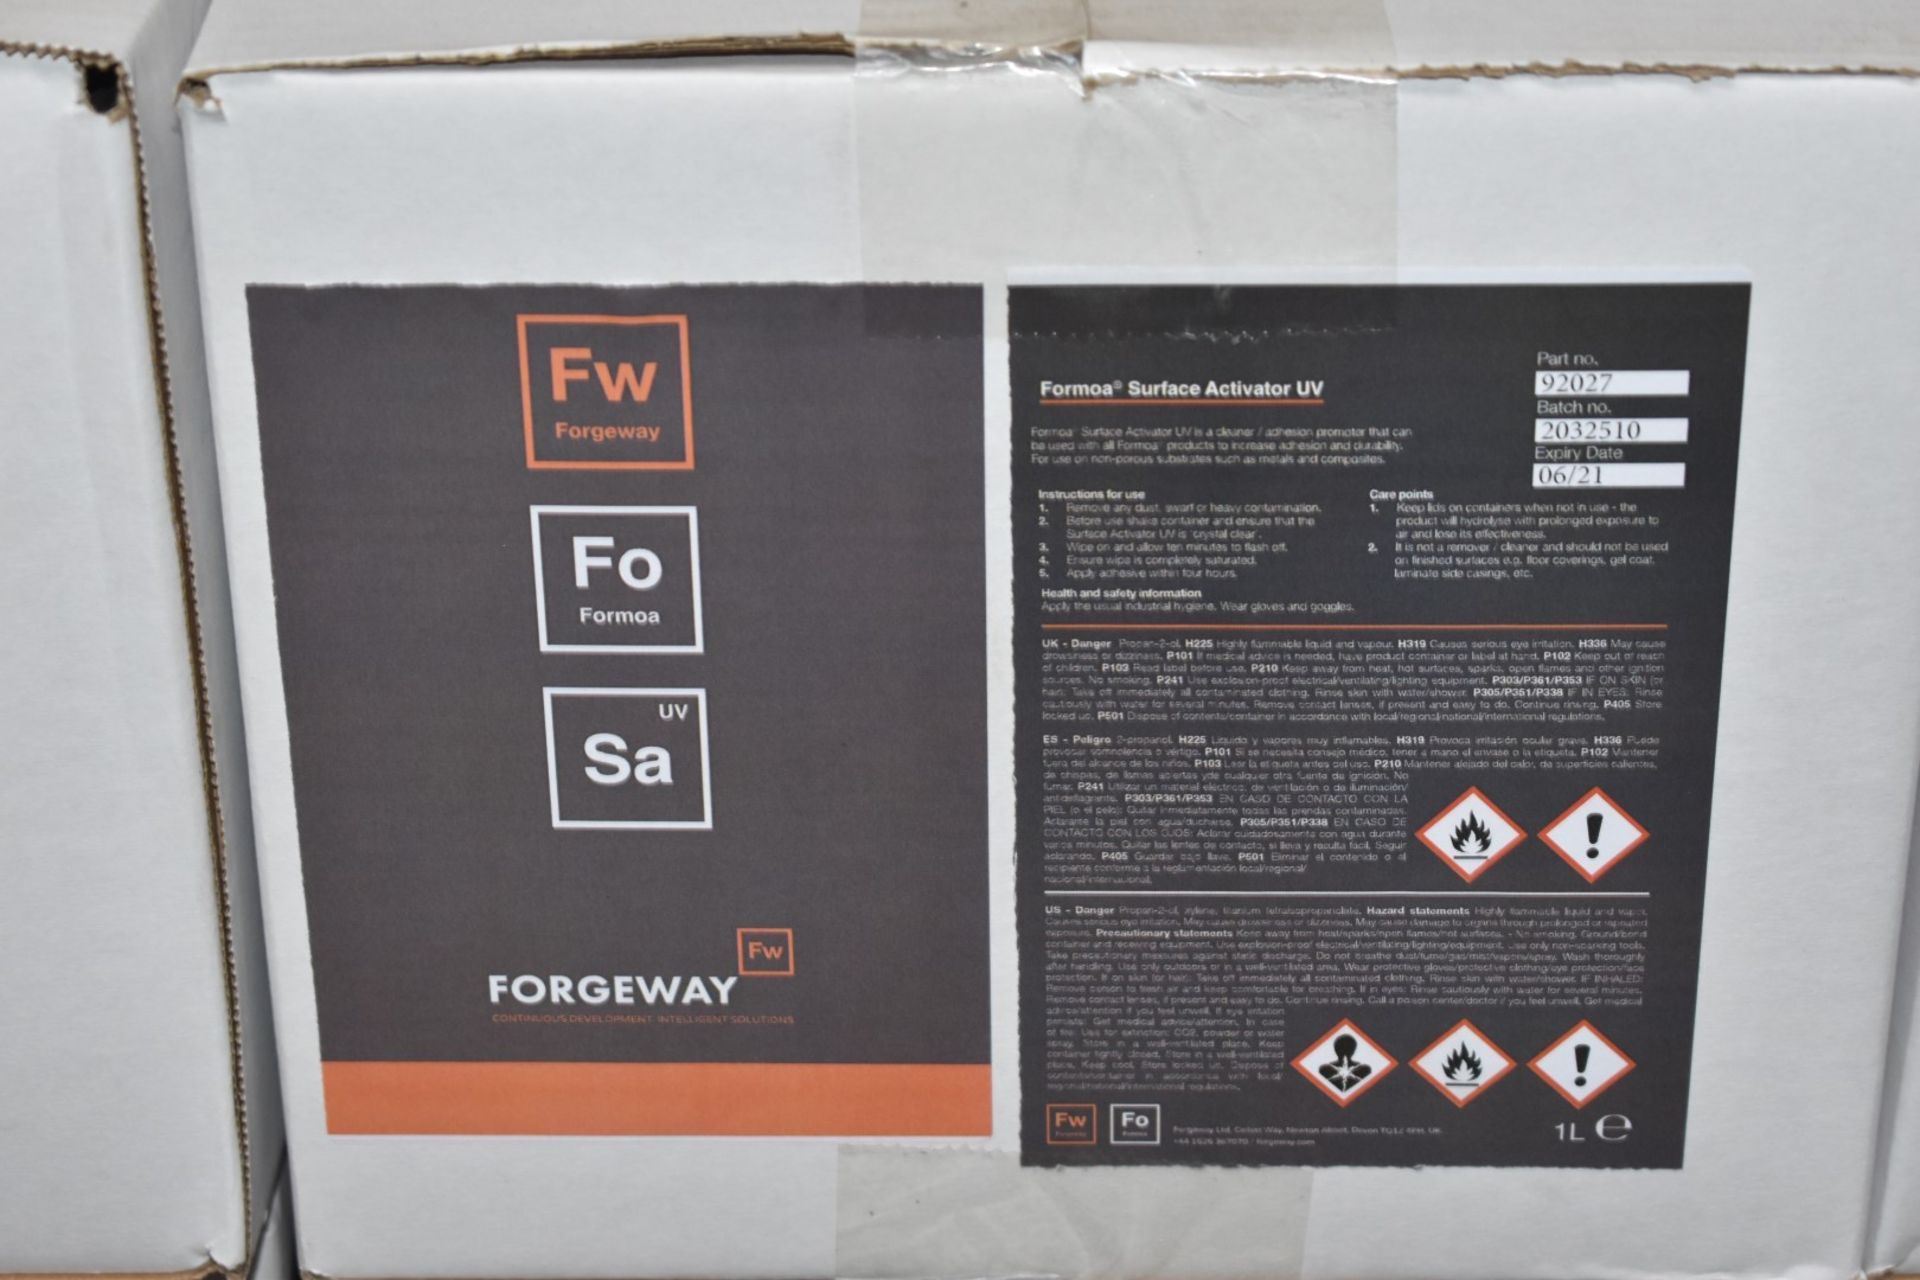 36 x Forgeway Formoa Surface Activator 1 Litre Containers - Adhesion Promotor, Cleaner, Degreaser - Image 5 of 6